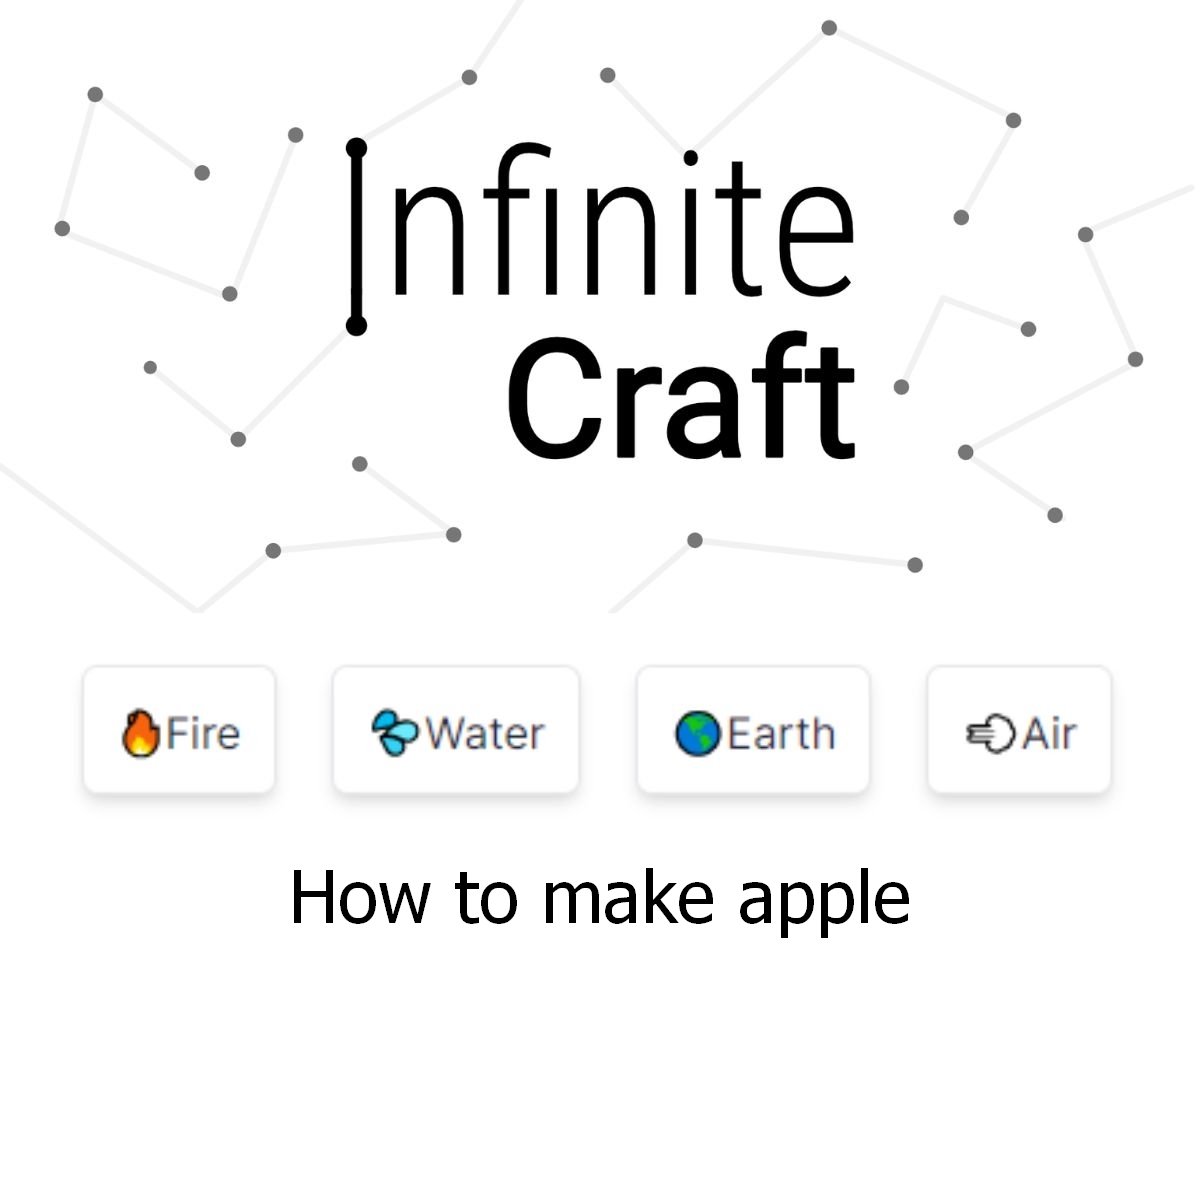 how to make apple in infinite craft